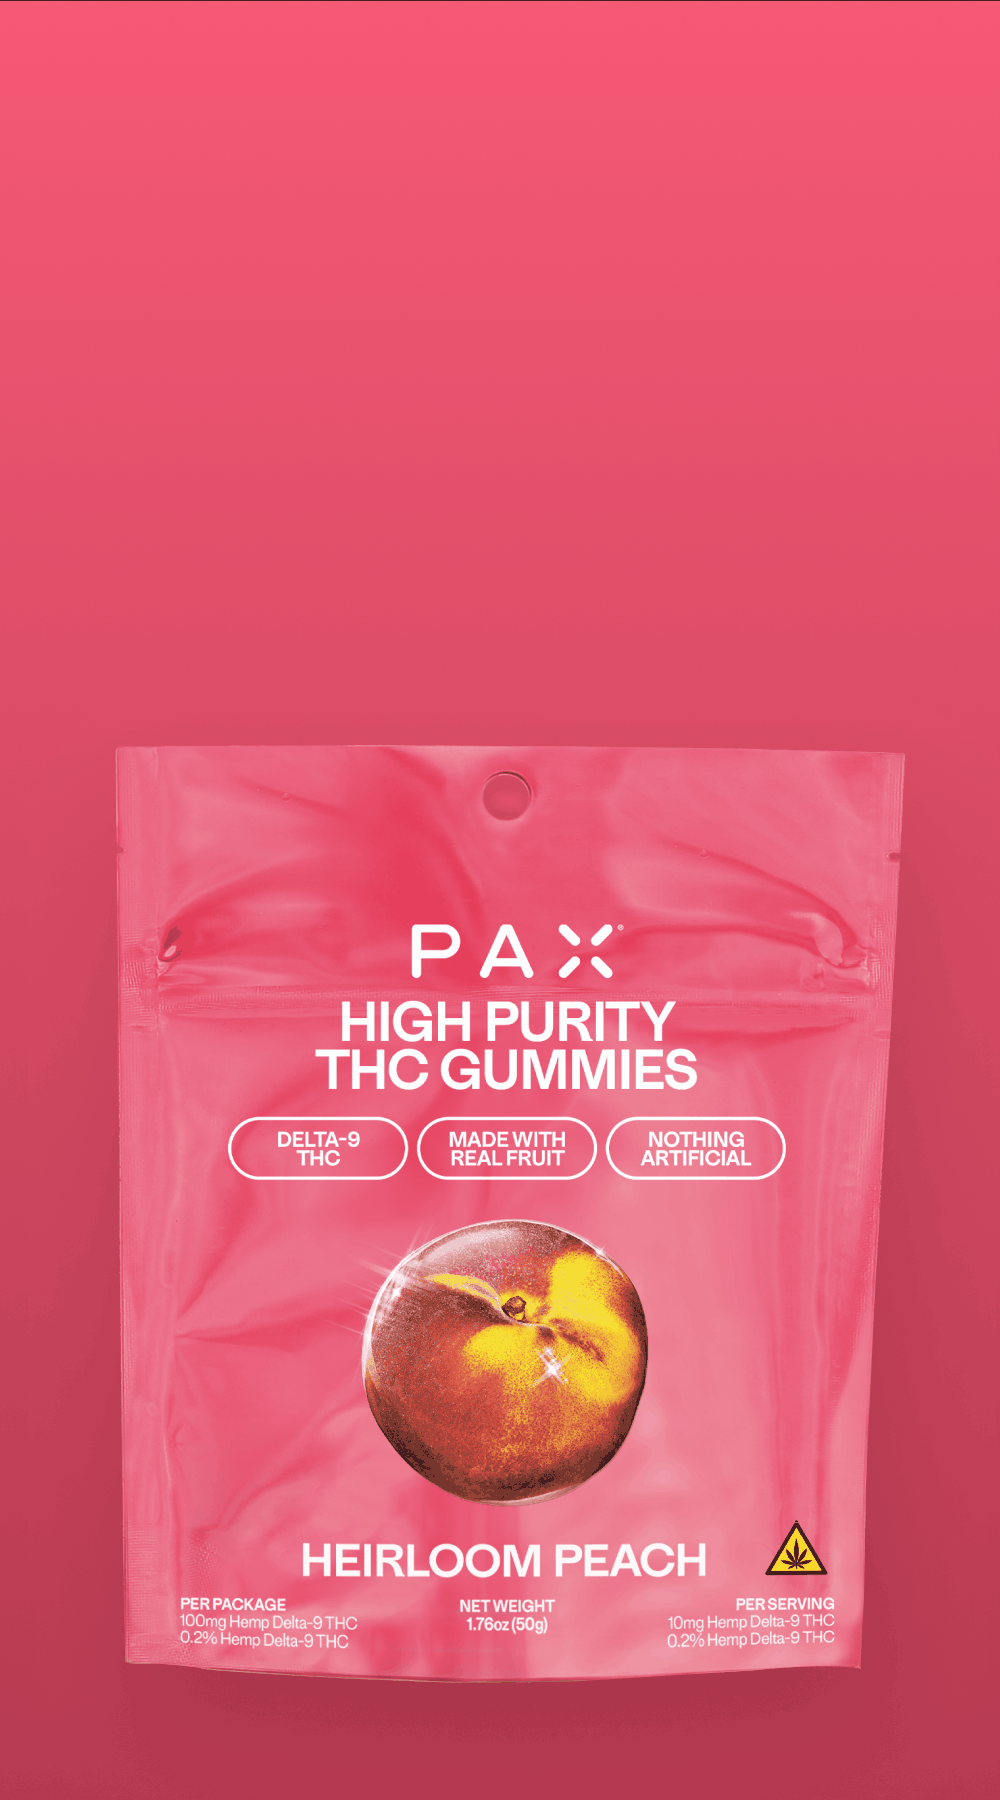 High Purity THC Gummies, showcasing the mango, strawberry and peach flavors with bright green, red and pink packaging